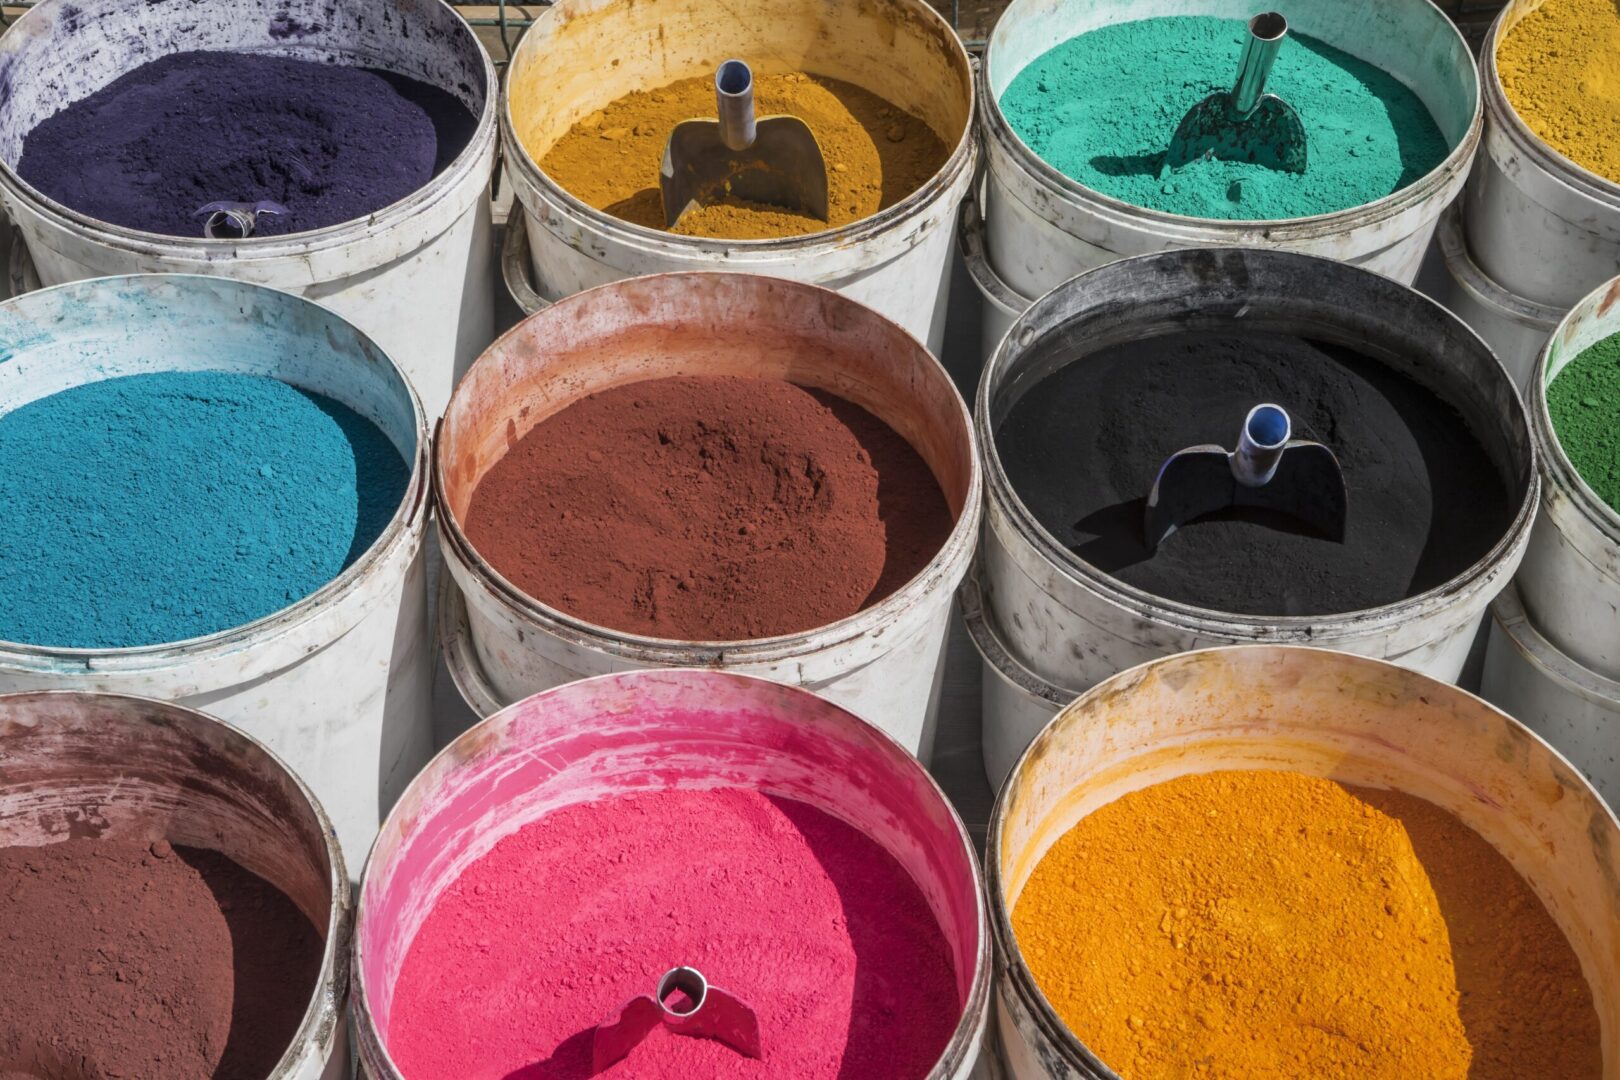 A group of buckets filled with different colored powders.